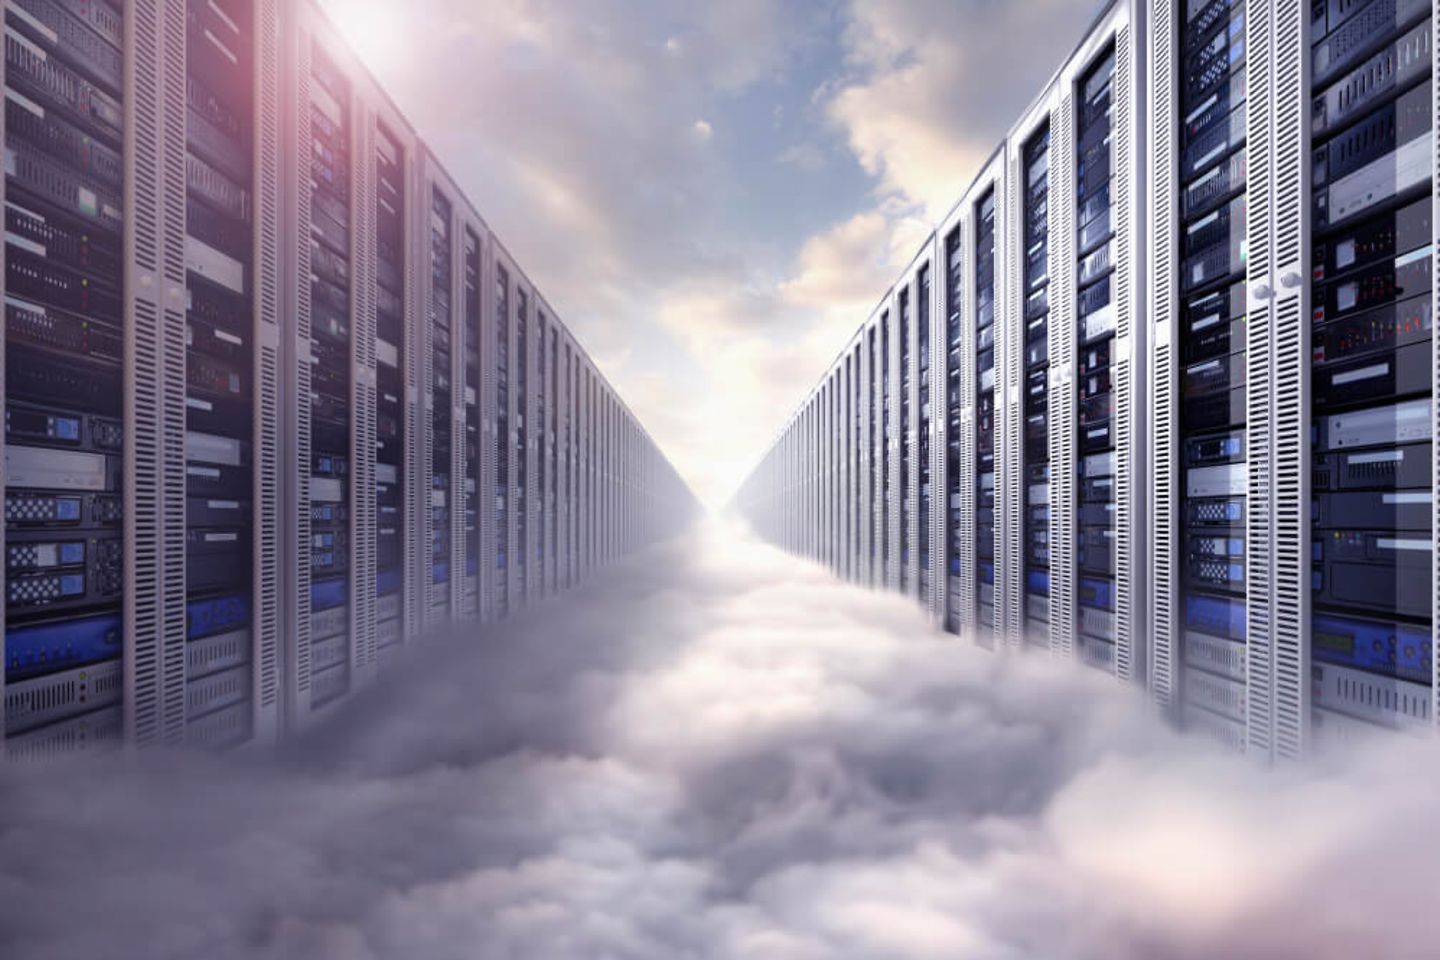 Composite image of computer servers and cloud